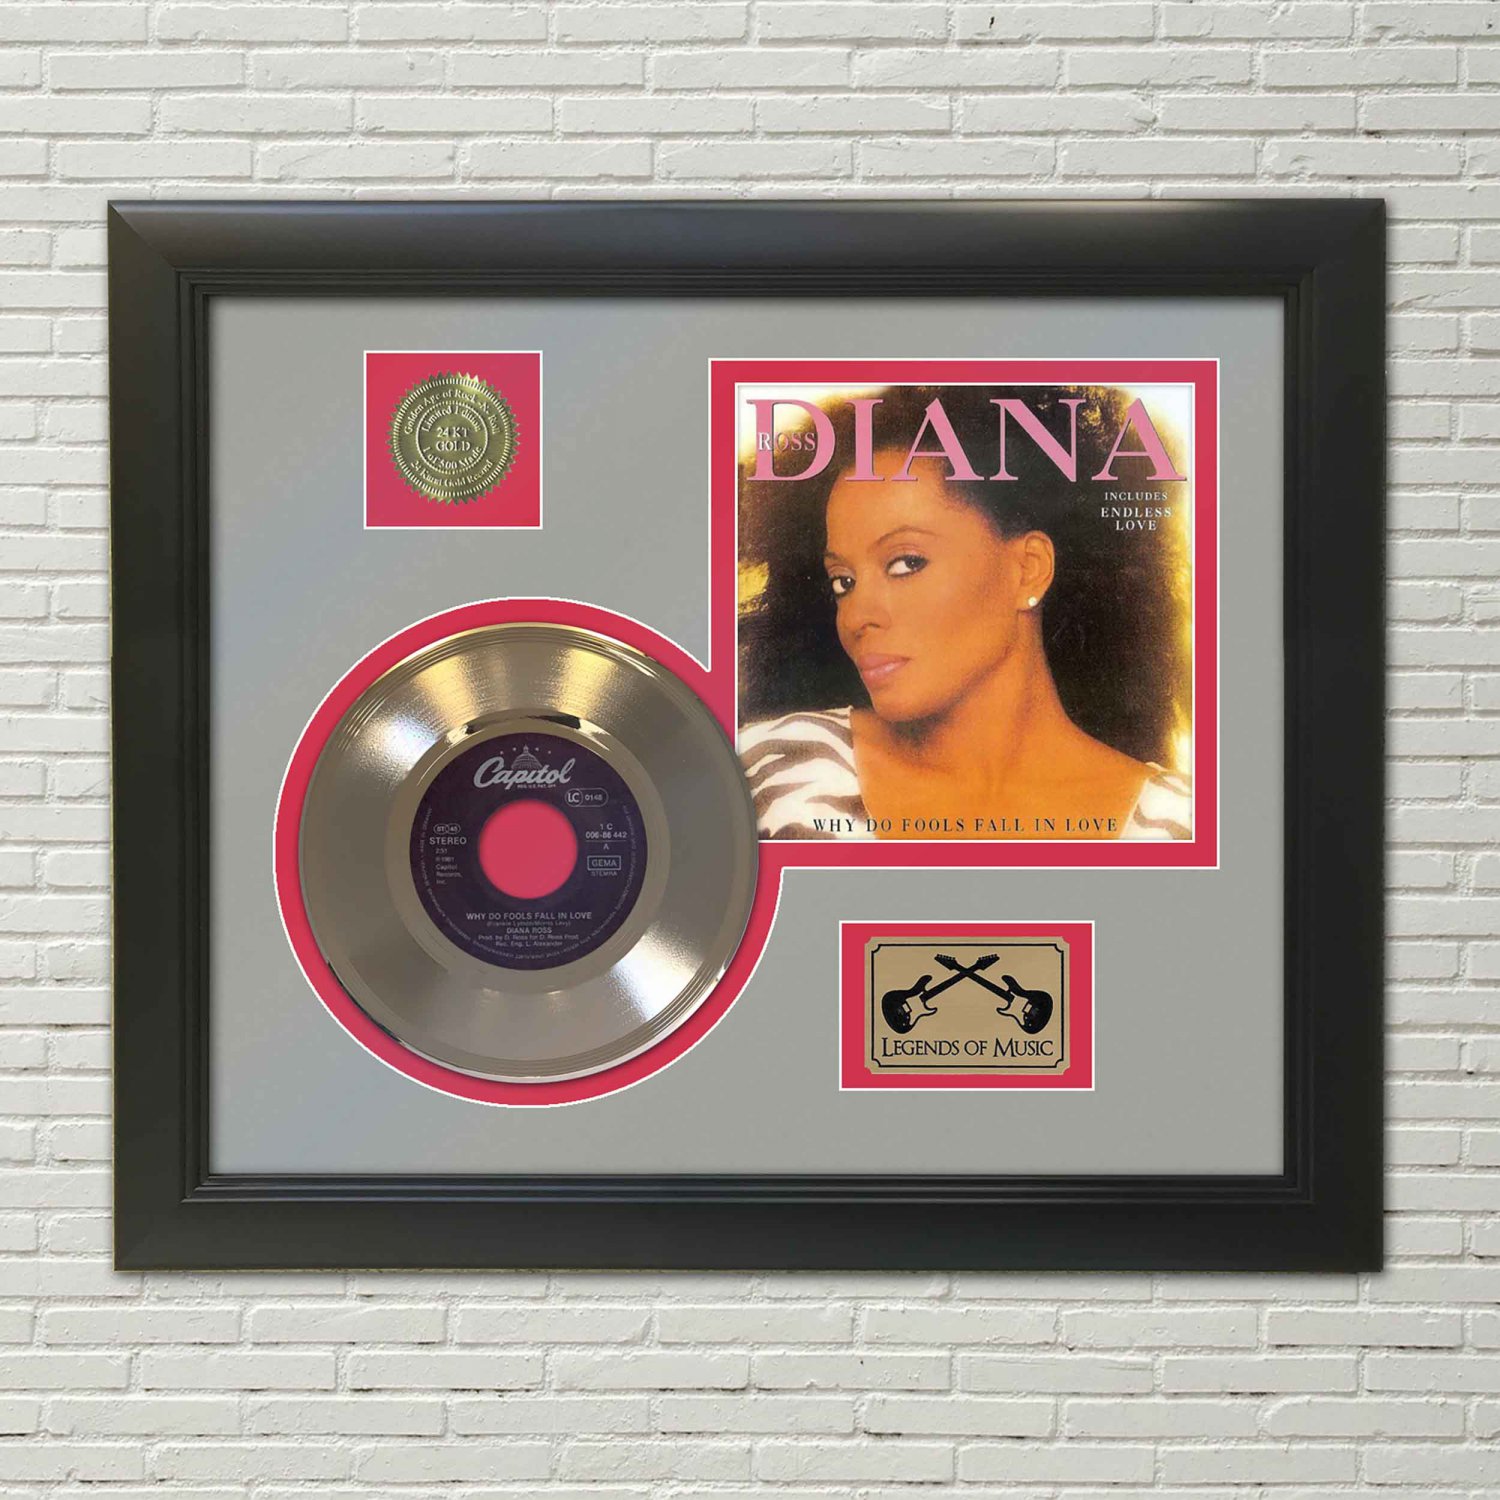 DIANA ROSS "Why Do Fools Fall in Love" Framed Picture Sleeve Gold 45 Record Display